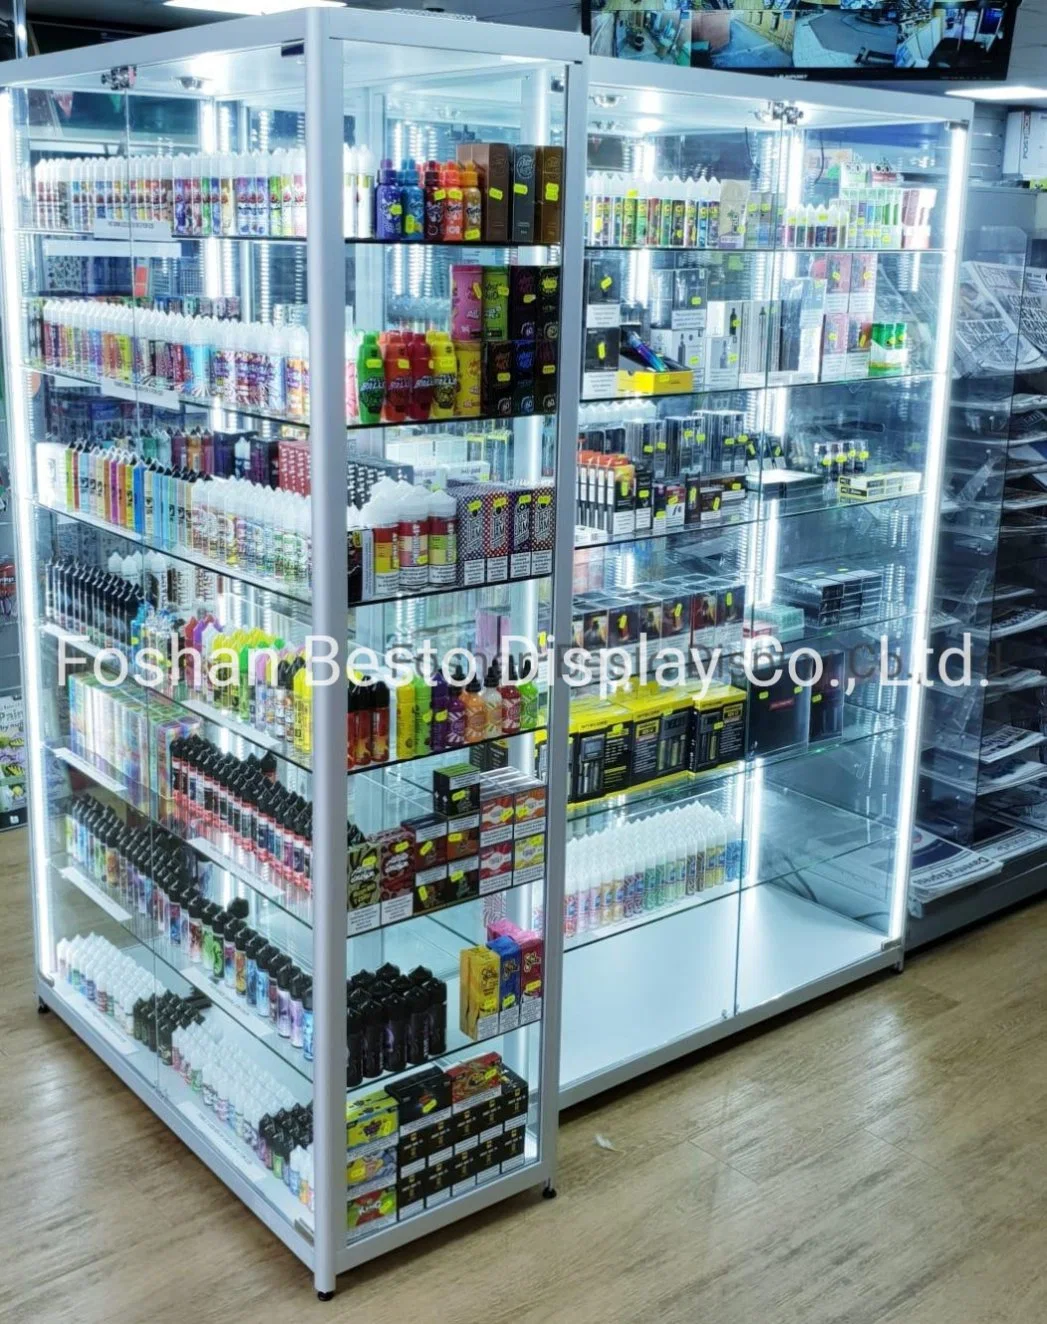 American Style Free Standing Display Glass Cabinet for Jewellery Display, Tobacco Display, Watches Display, Vape Store, Perfume Display, Other Retail Display